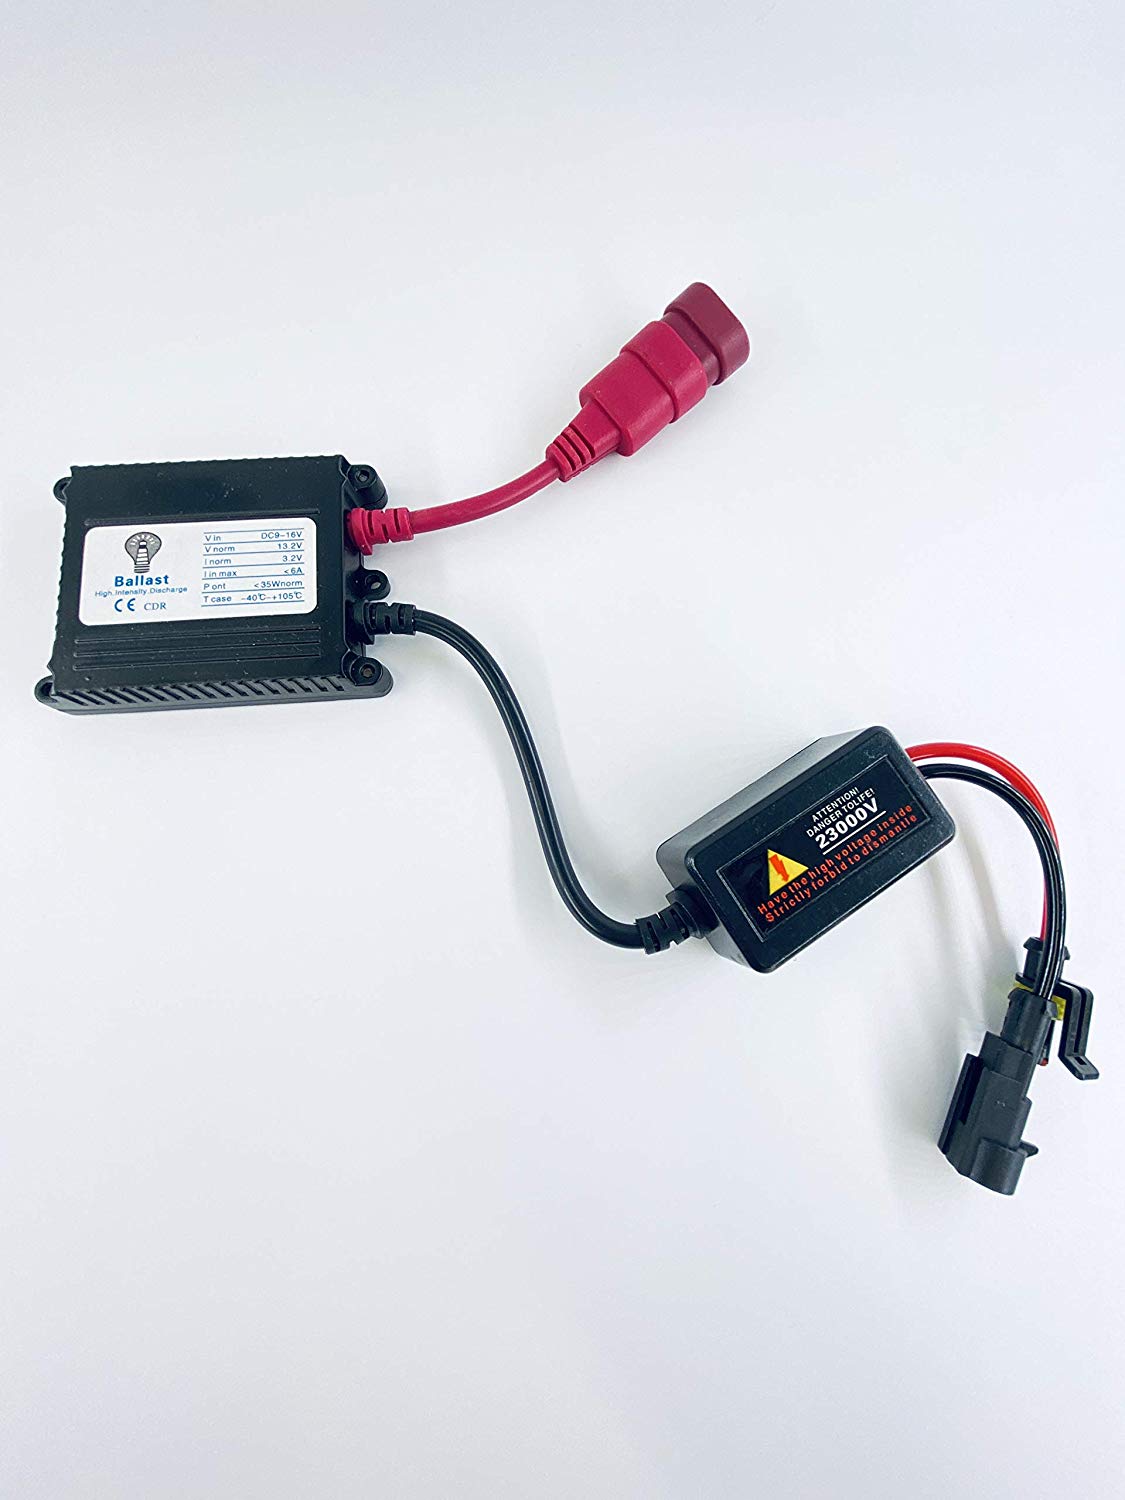 CDRAUTO Slim 35w 12v HID Replacement Slim Ballast for H1 H3 H4 H7 H10 H11 9005 9006 D2r D2s All Sizes